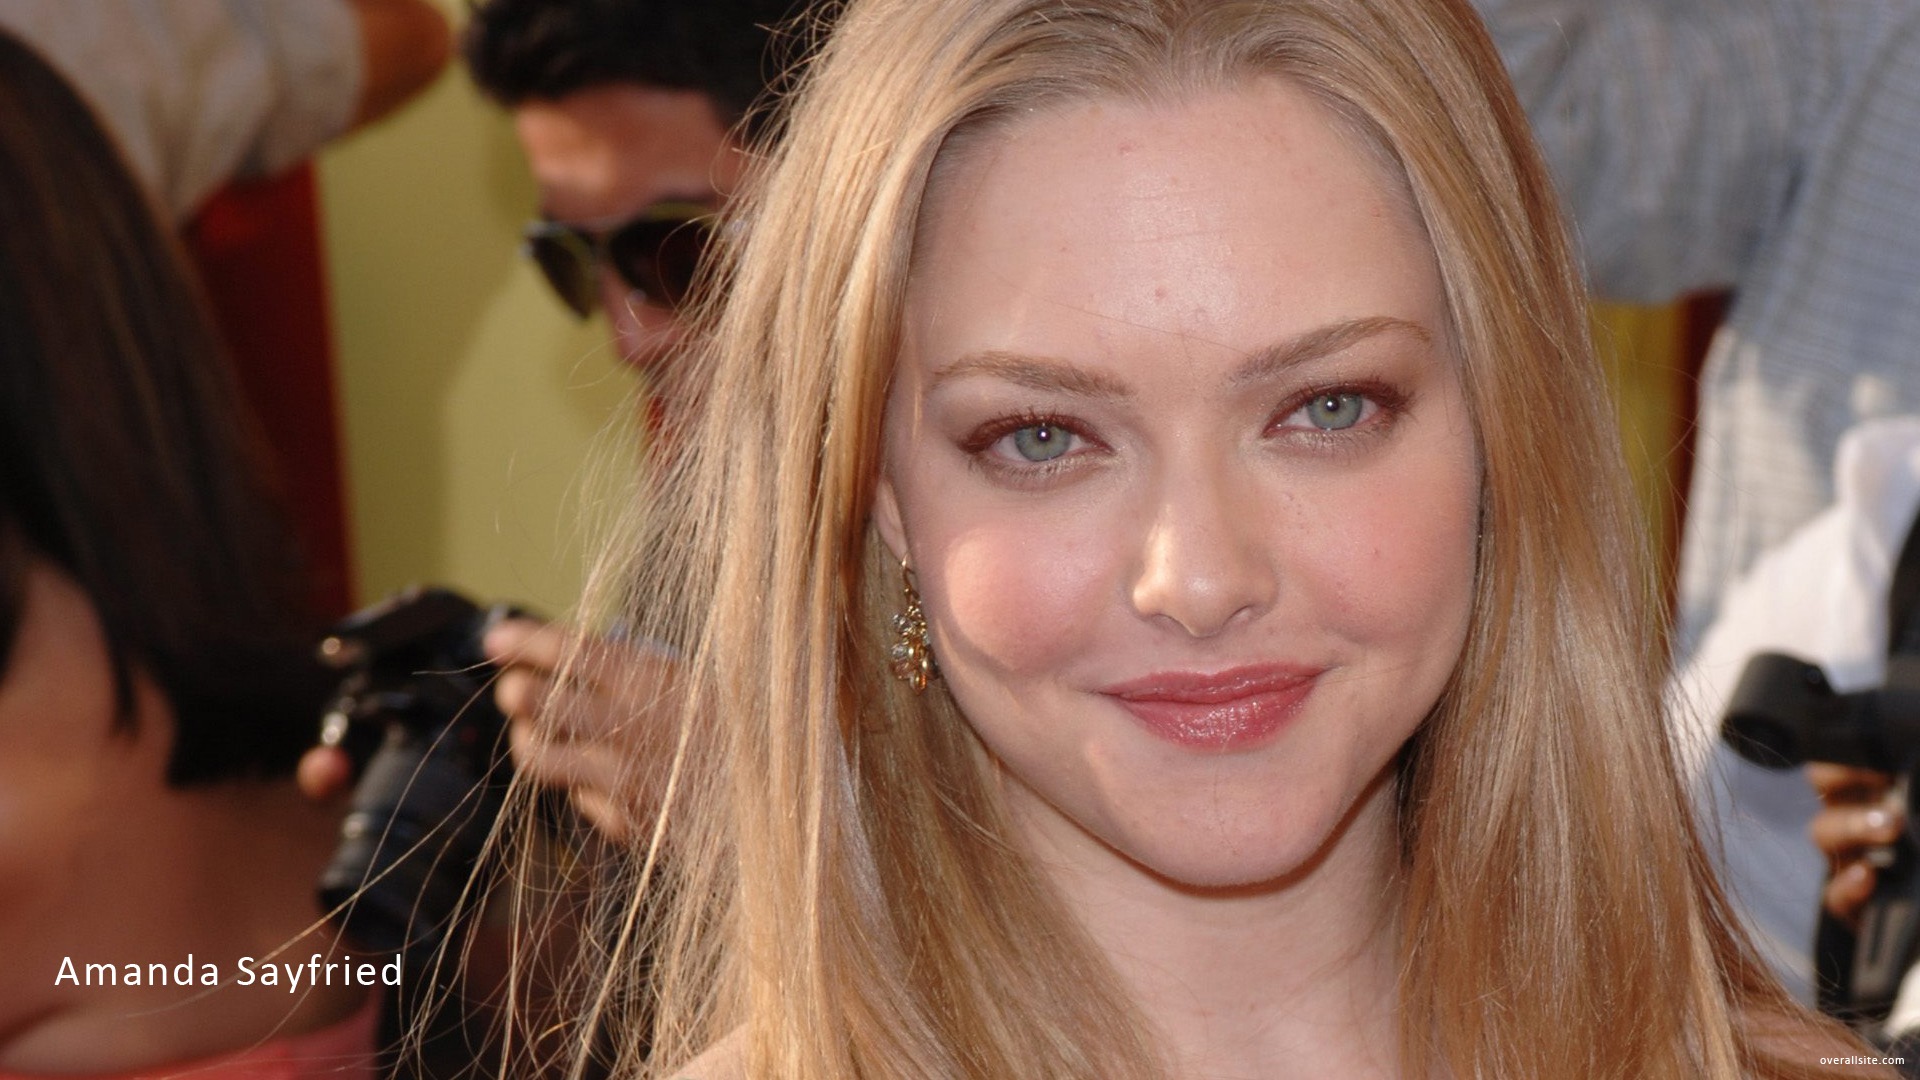 Amanda Seyfried #013 - 1920x1080 Wallpapers Pictures Photos Images